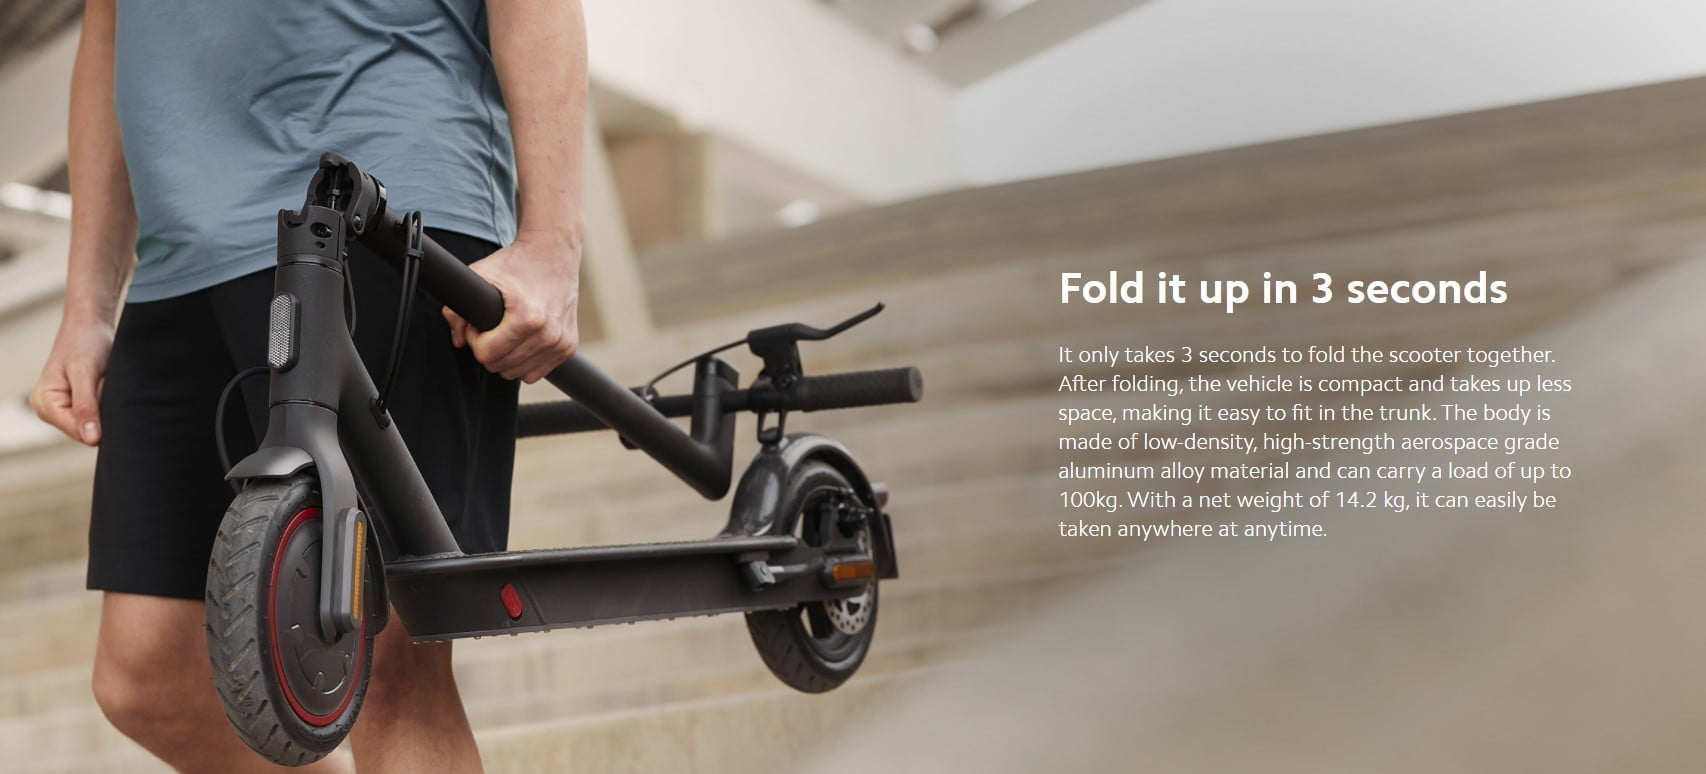 Screenshot 2021 02 27 190212 Xiaomi &Lt;H1&Gt;Mi Electric Scooterpro 2&Lt;/H1&Gt; &Lt;H2&Gt;Ride With Power, Go The Distance&Lt;/H2&Gt; &Lt;P Class=&Quot;Title&Quot;&Gt;Performance Upgrades That Will Take You Further: The Perfect Combination Of Practicality And Beauty, Taking You To Further Places.&Lt;/P&Gt; 600W Powerful Motor Performance Enjoy The Speed &Lt;P Class=&Quot;Title&Quot;&Gt;Three-Speed Modes, Easy Switch: When Commuting To Work, Press S To Go Faster. When Cruising Around The Park, Press D, And In Crowded Areas, You Can Turn On The Pedestrian Mode To Go Slower. Simply Double Press The Power Button To Switch Between Modes And Easily Adjust The Speed To Your Surroundings.&Lt;/P&Gt; High Safety Lithium Battery: 45Km Super Long-Range Battery New Generation Energy Recovery System: Convert Kinetic Energy Into Electrical Energy For Longer Battery Life Central Controls Designed For A Better Riding Experience Easy To Control, Try And You Will Know &Lt;P Class=&Quot;Title&Quot;&Gt;Fold It Up In 3 Seconds&Lt;/P&Gt; Fifth-Generation Bms Smart Battery Management System